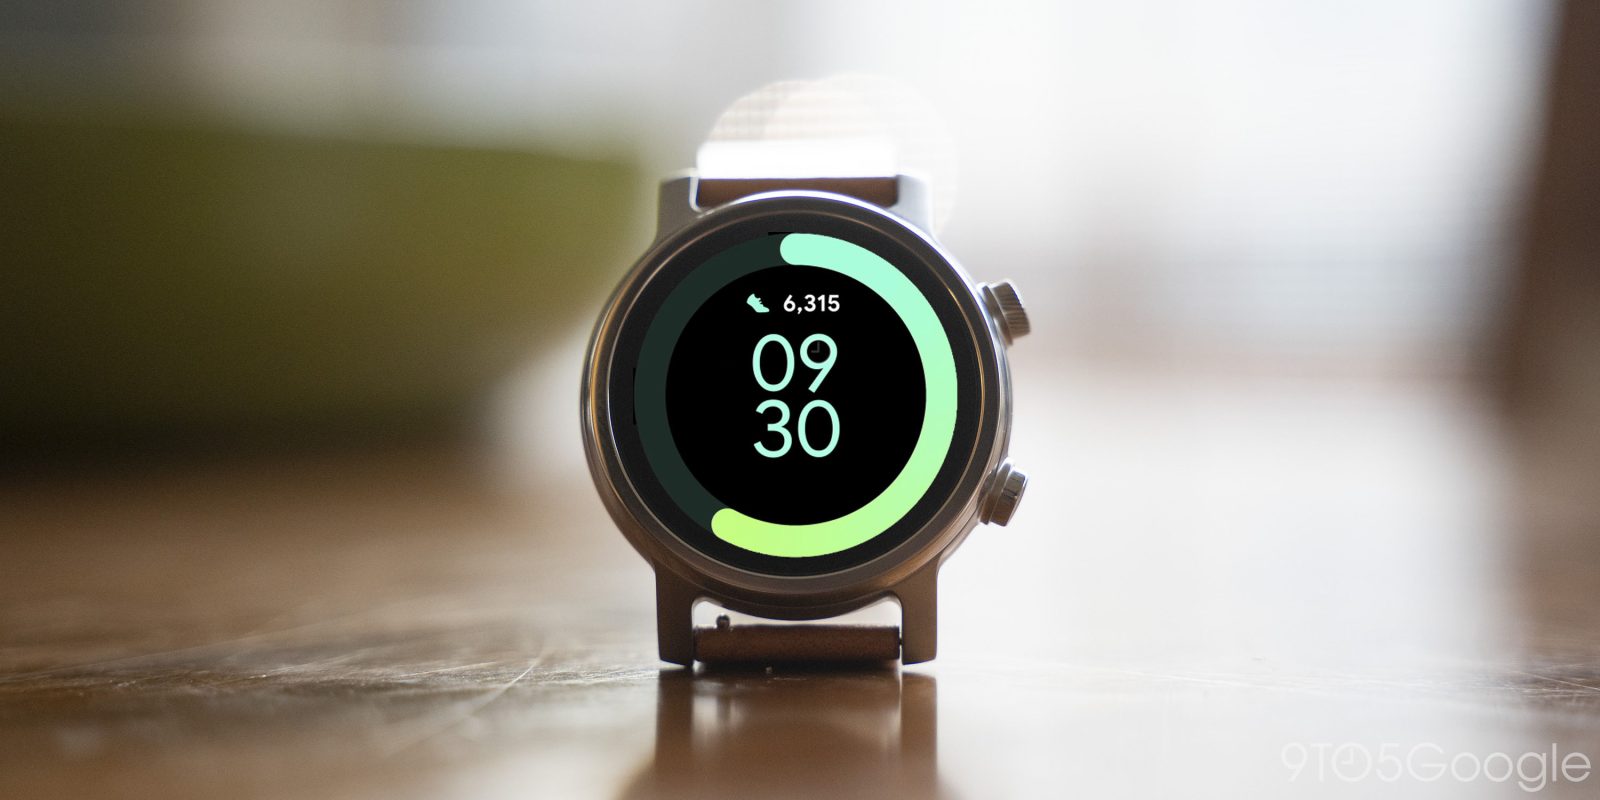 Likely Pixel Watch watchfaces